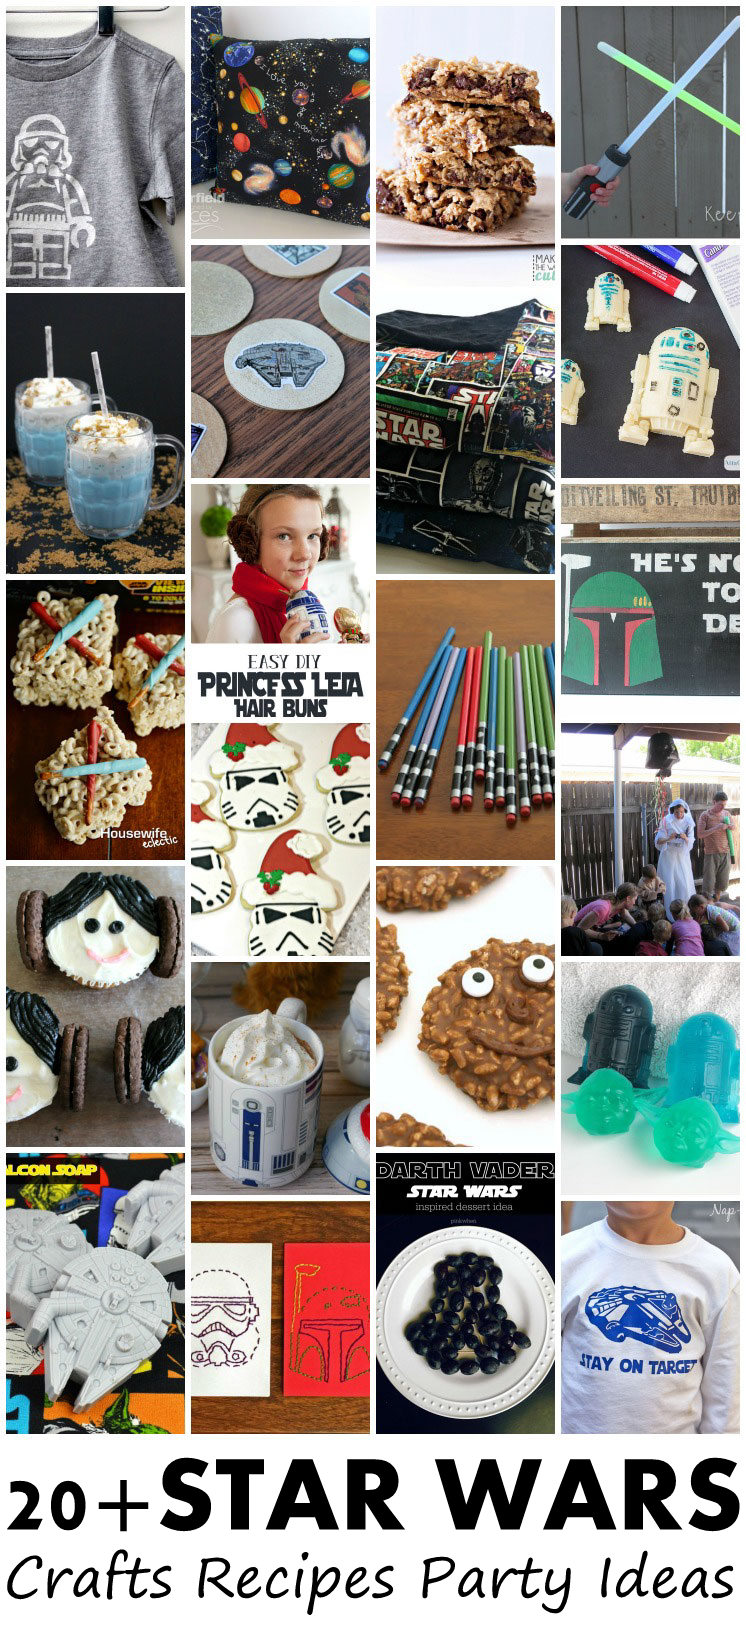 Over 20 awesome Star Wars DIY tutorials, craft projects, recipes and party ideas